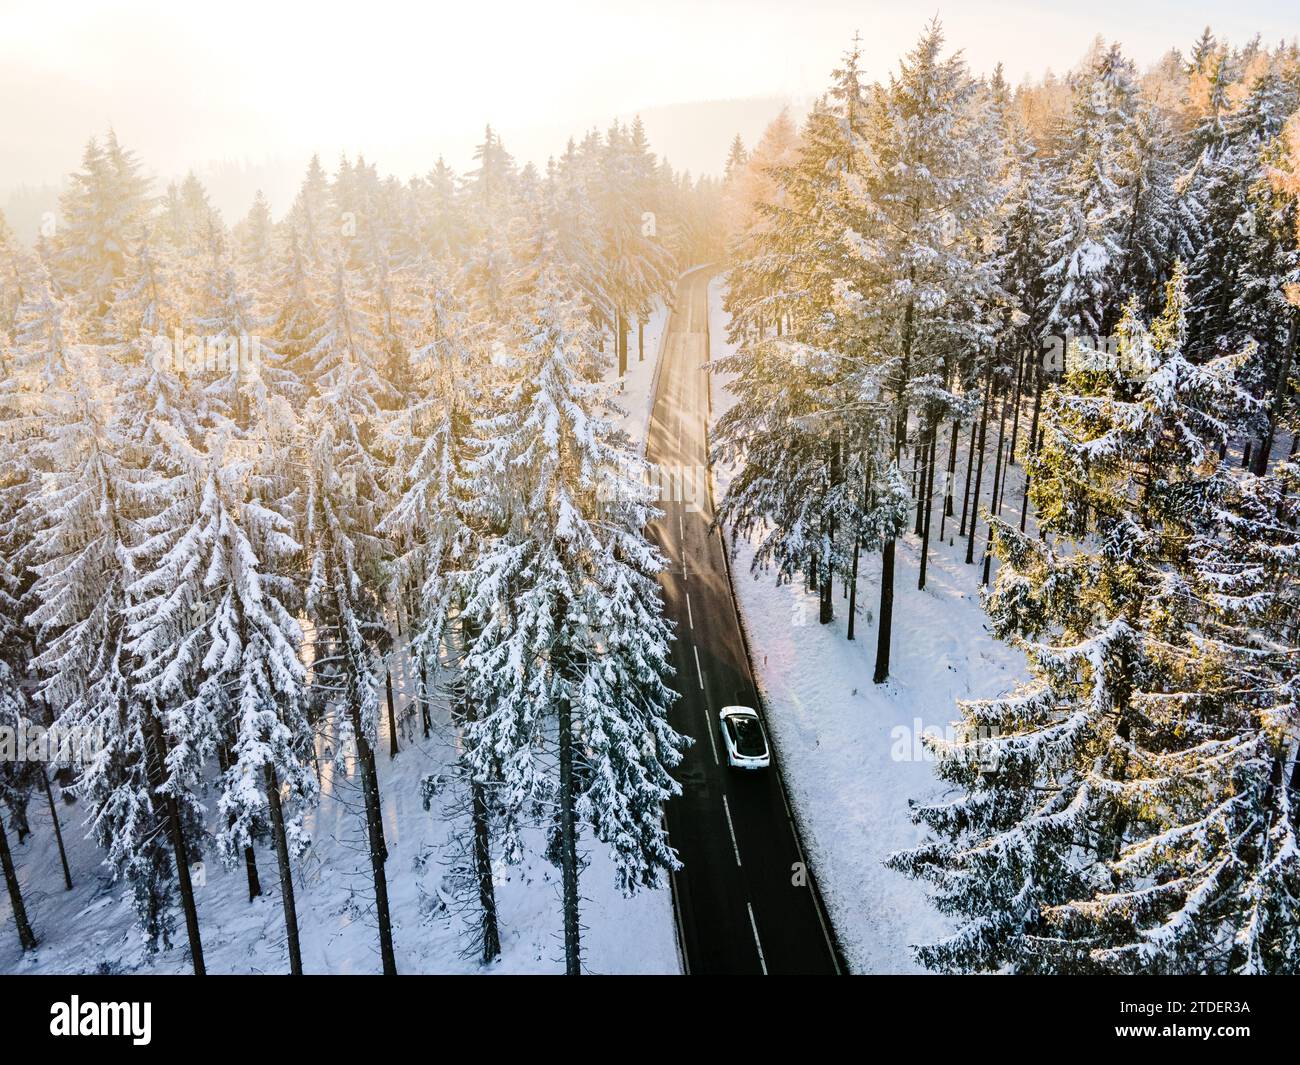 An aerial photograph capturing a mesmerizing winter scene in Feldberg, Hessen. The composition features a solitary vehicle traveling down a snow-lined Stock Photo